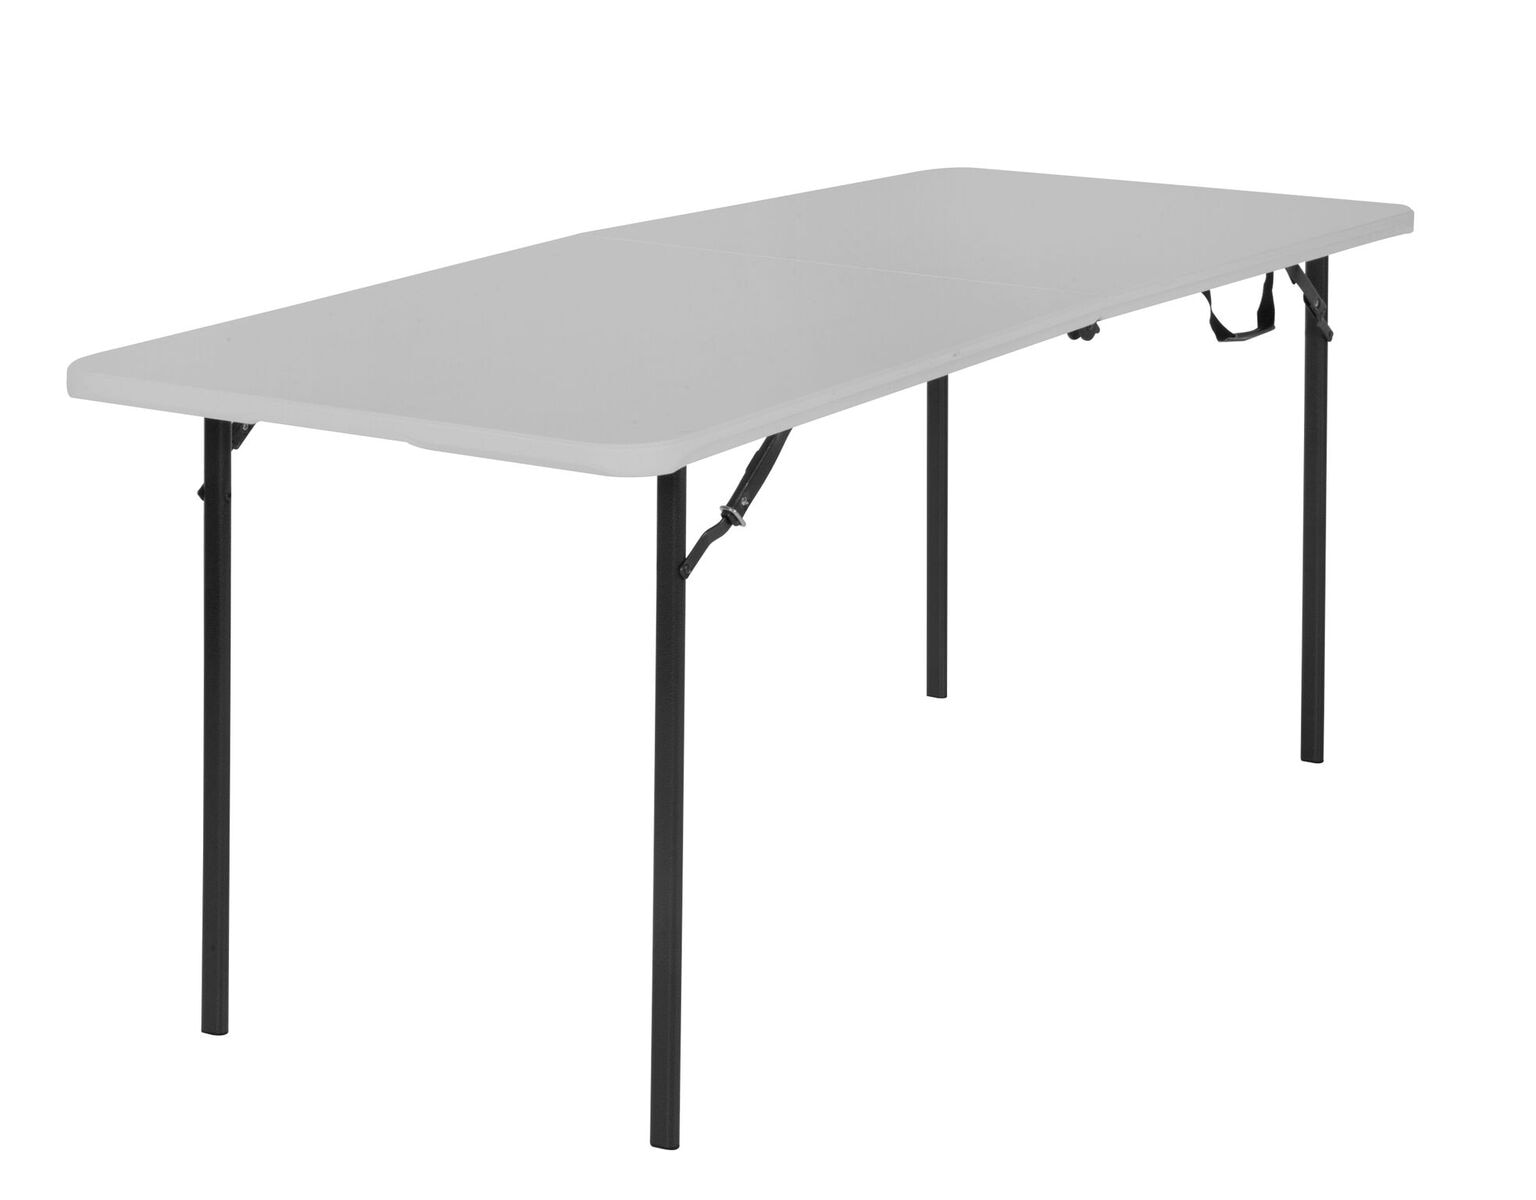 Folding Tables Department At, How Wide Are 8 Foot Banquet Tables